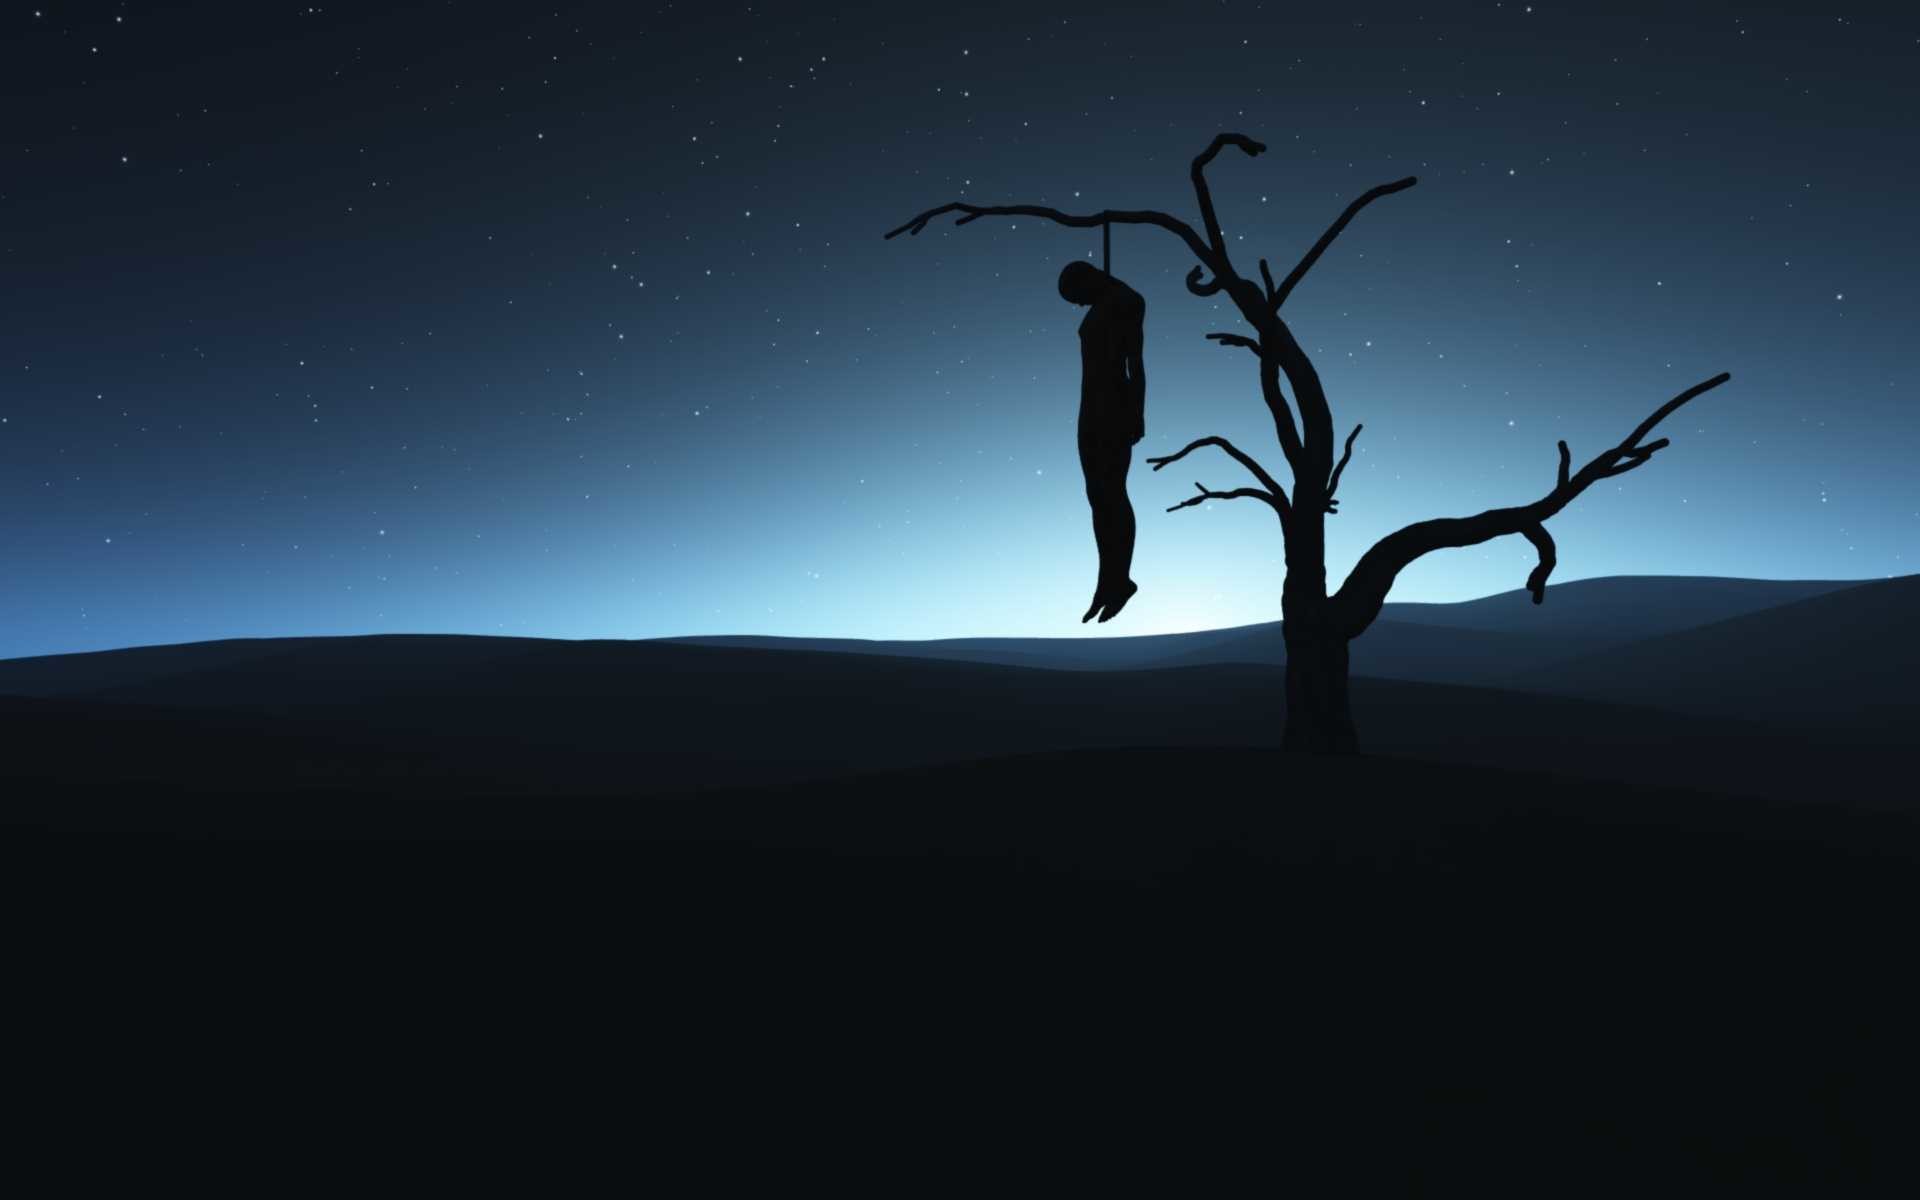 Scary Wallpapers Concert Creepy Design 154 Backgrounds - Hanging Man On The Tree , HD Wallpaper & Backgrounds